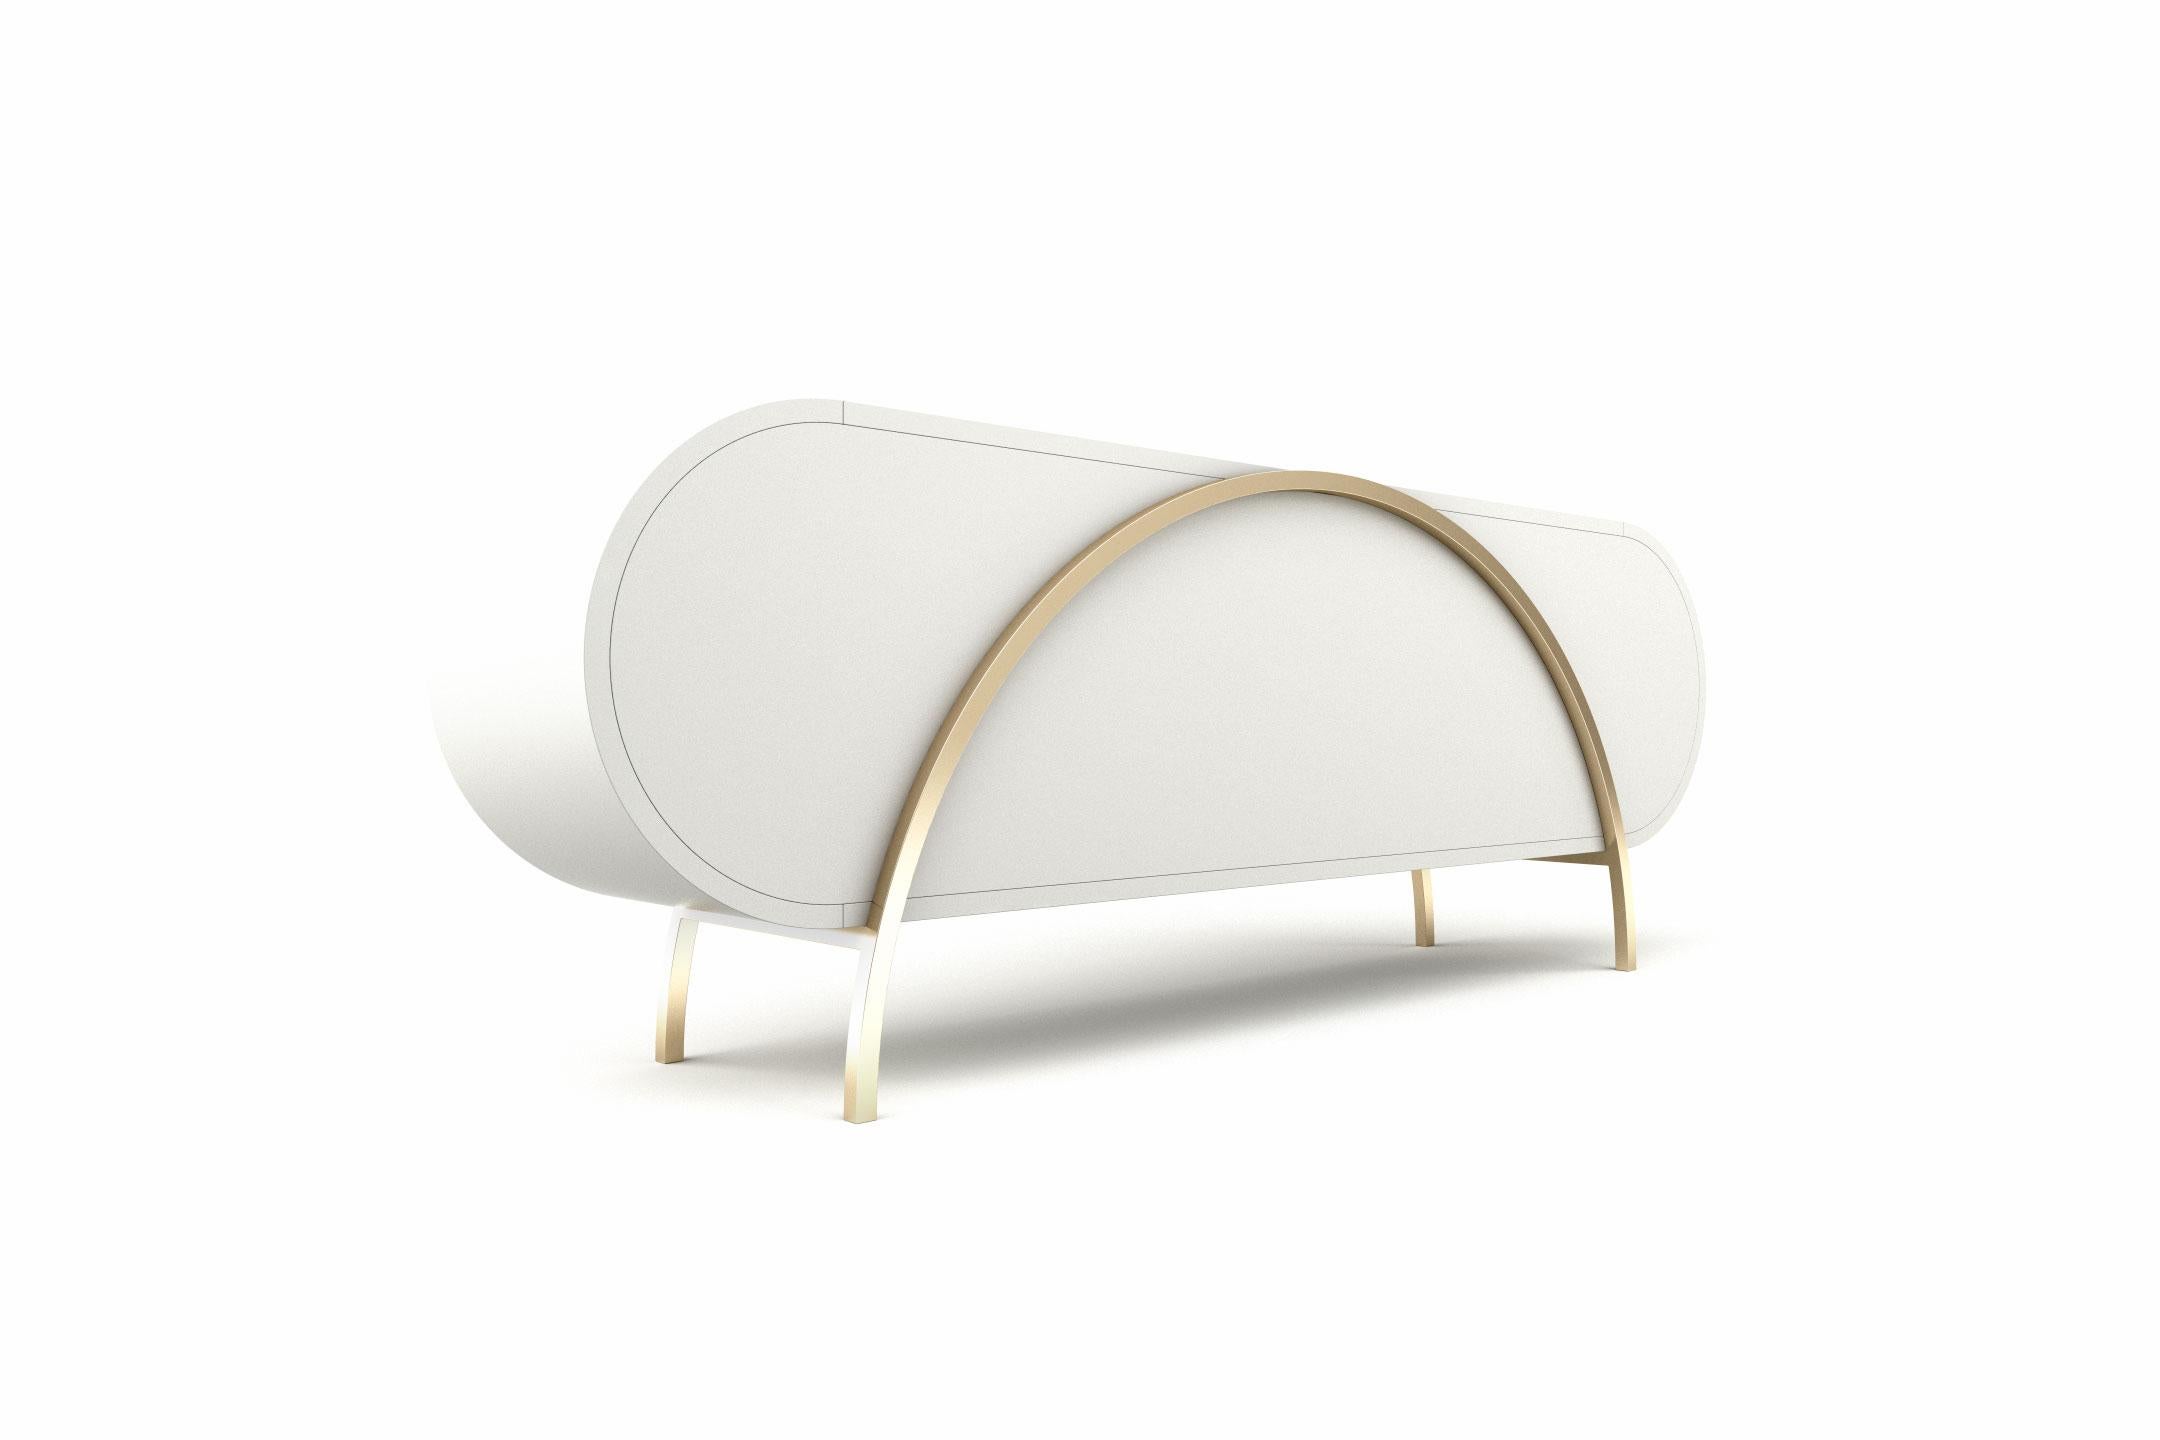 Crescent Sideboard - Modern White Lacquered Sideboard with Brass Legs In New Condition For Sale In London, GB